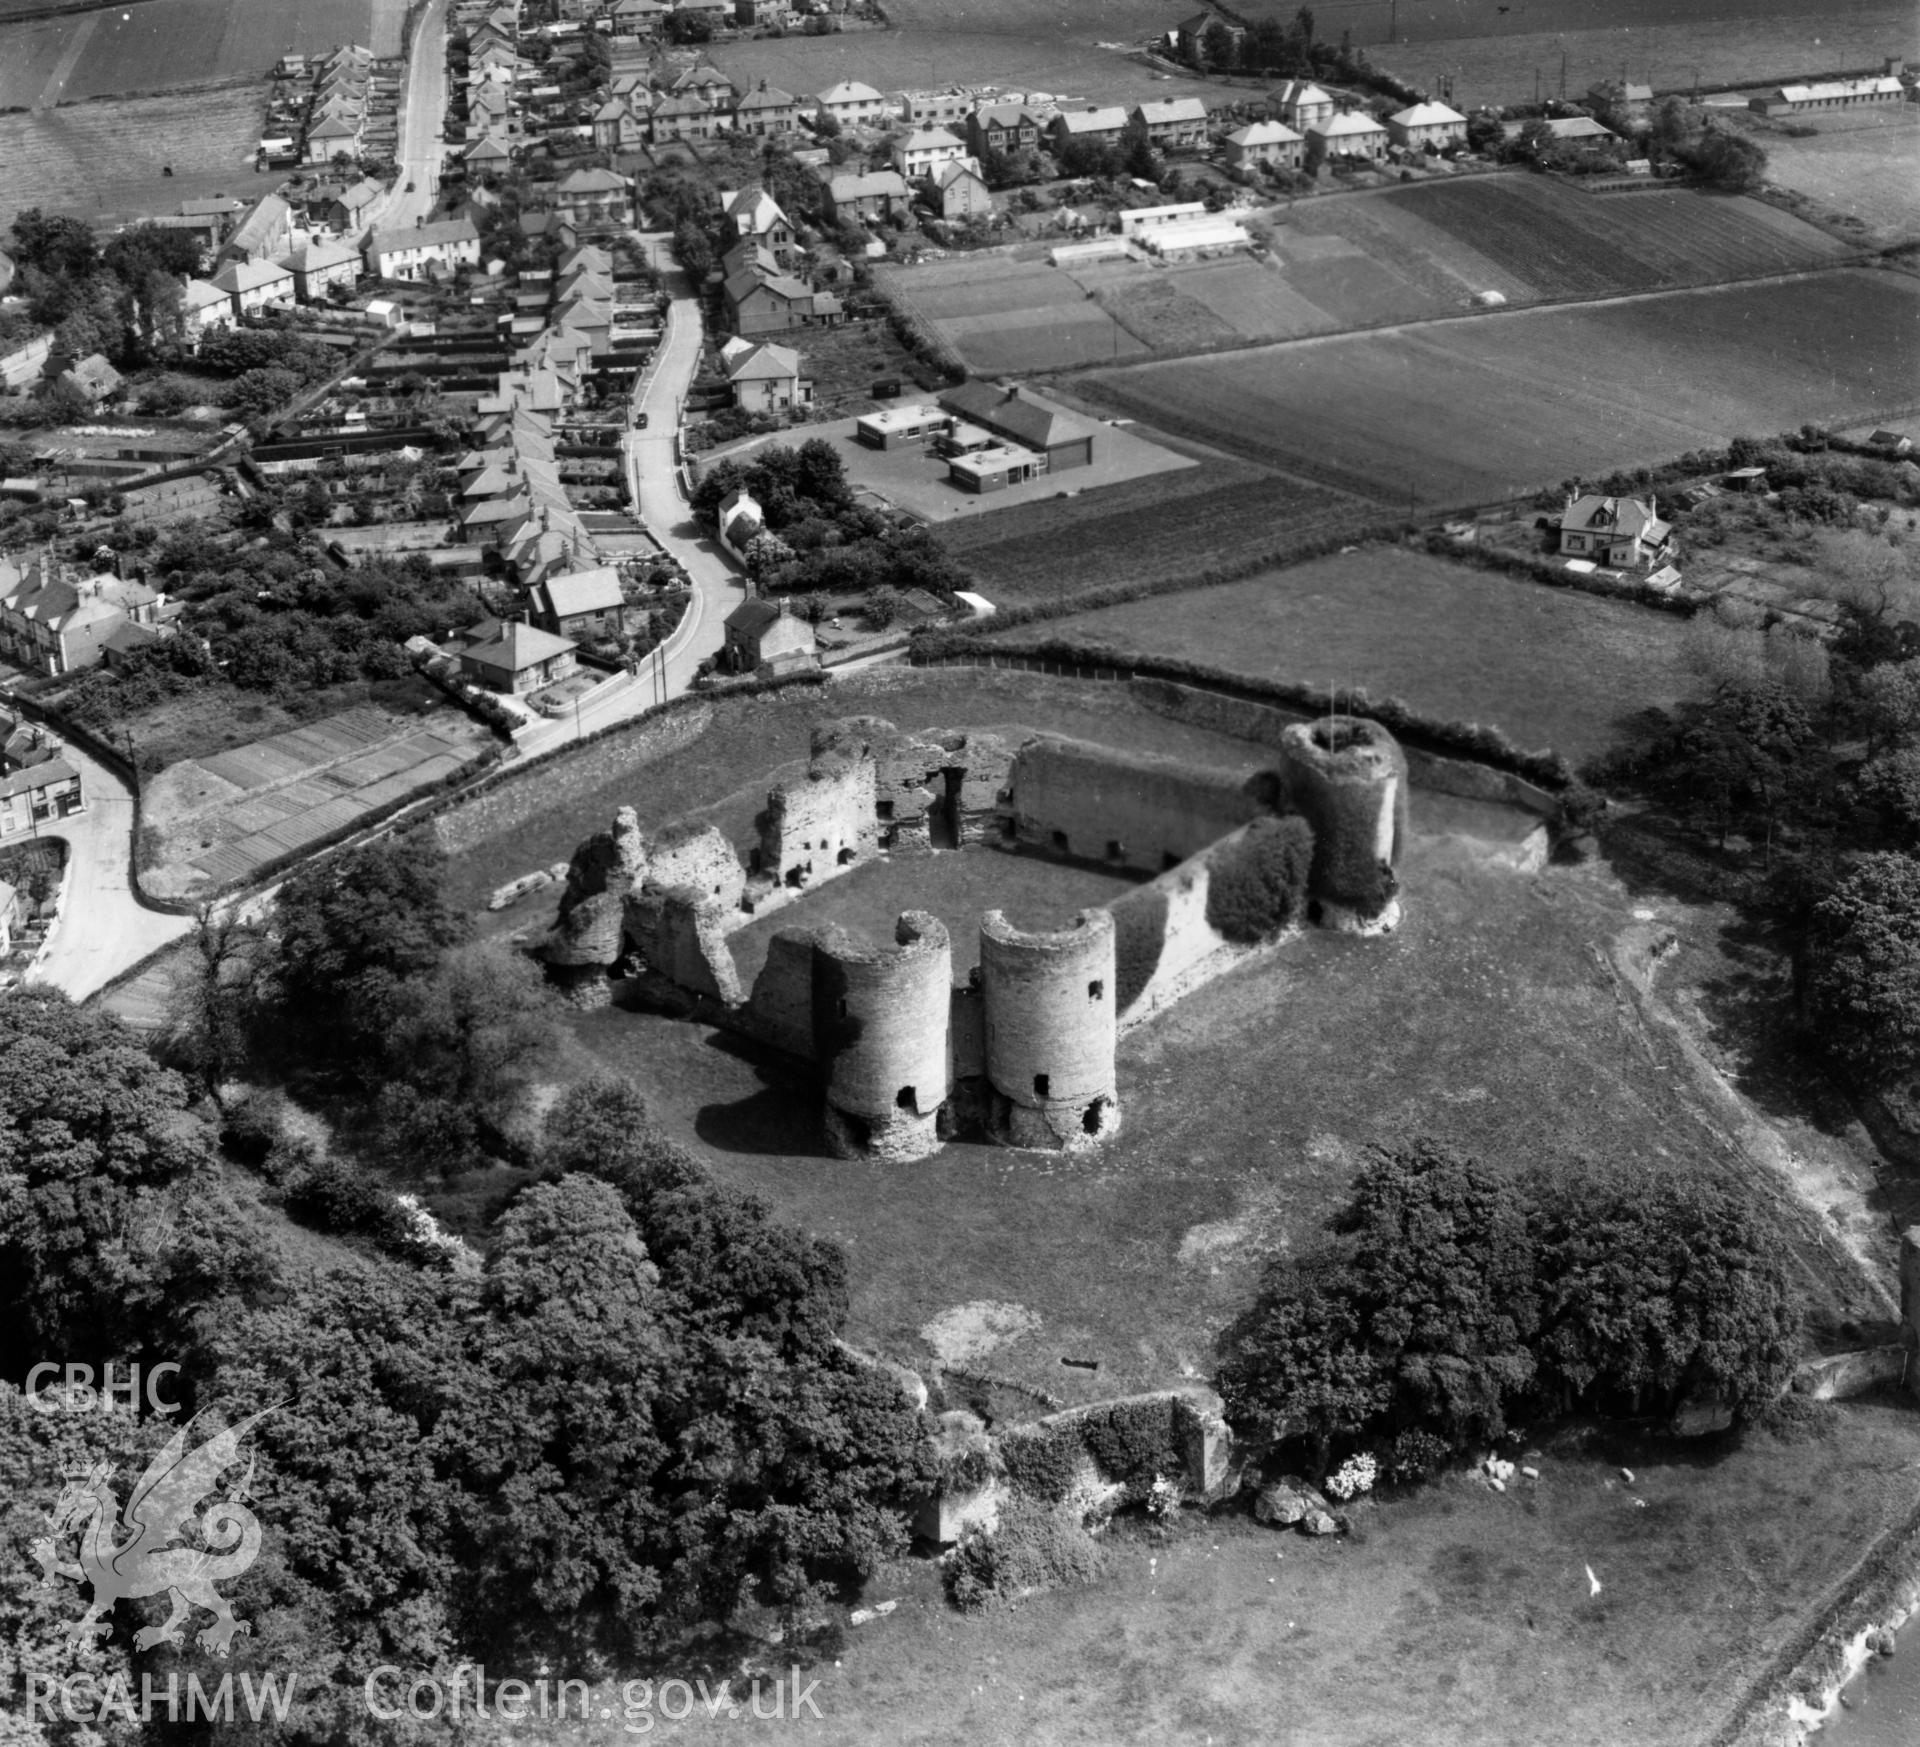 View of Rhuddlan showing castle. Oblique aerial photograph, 5?" cut roll film.